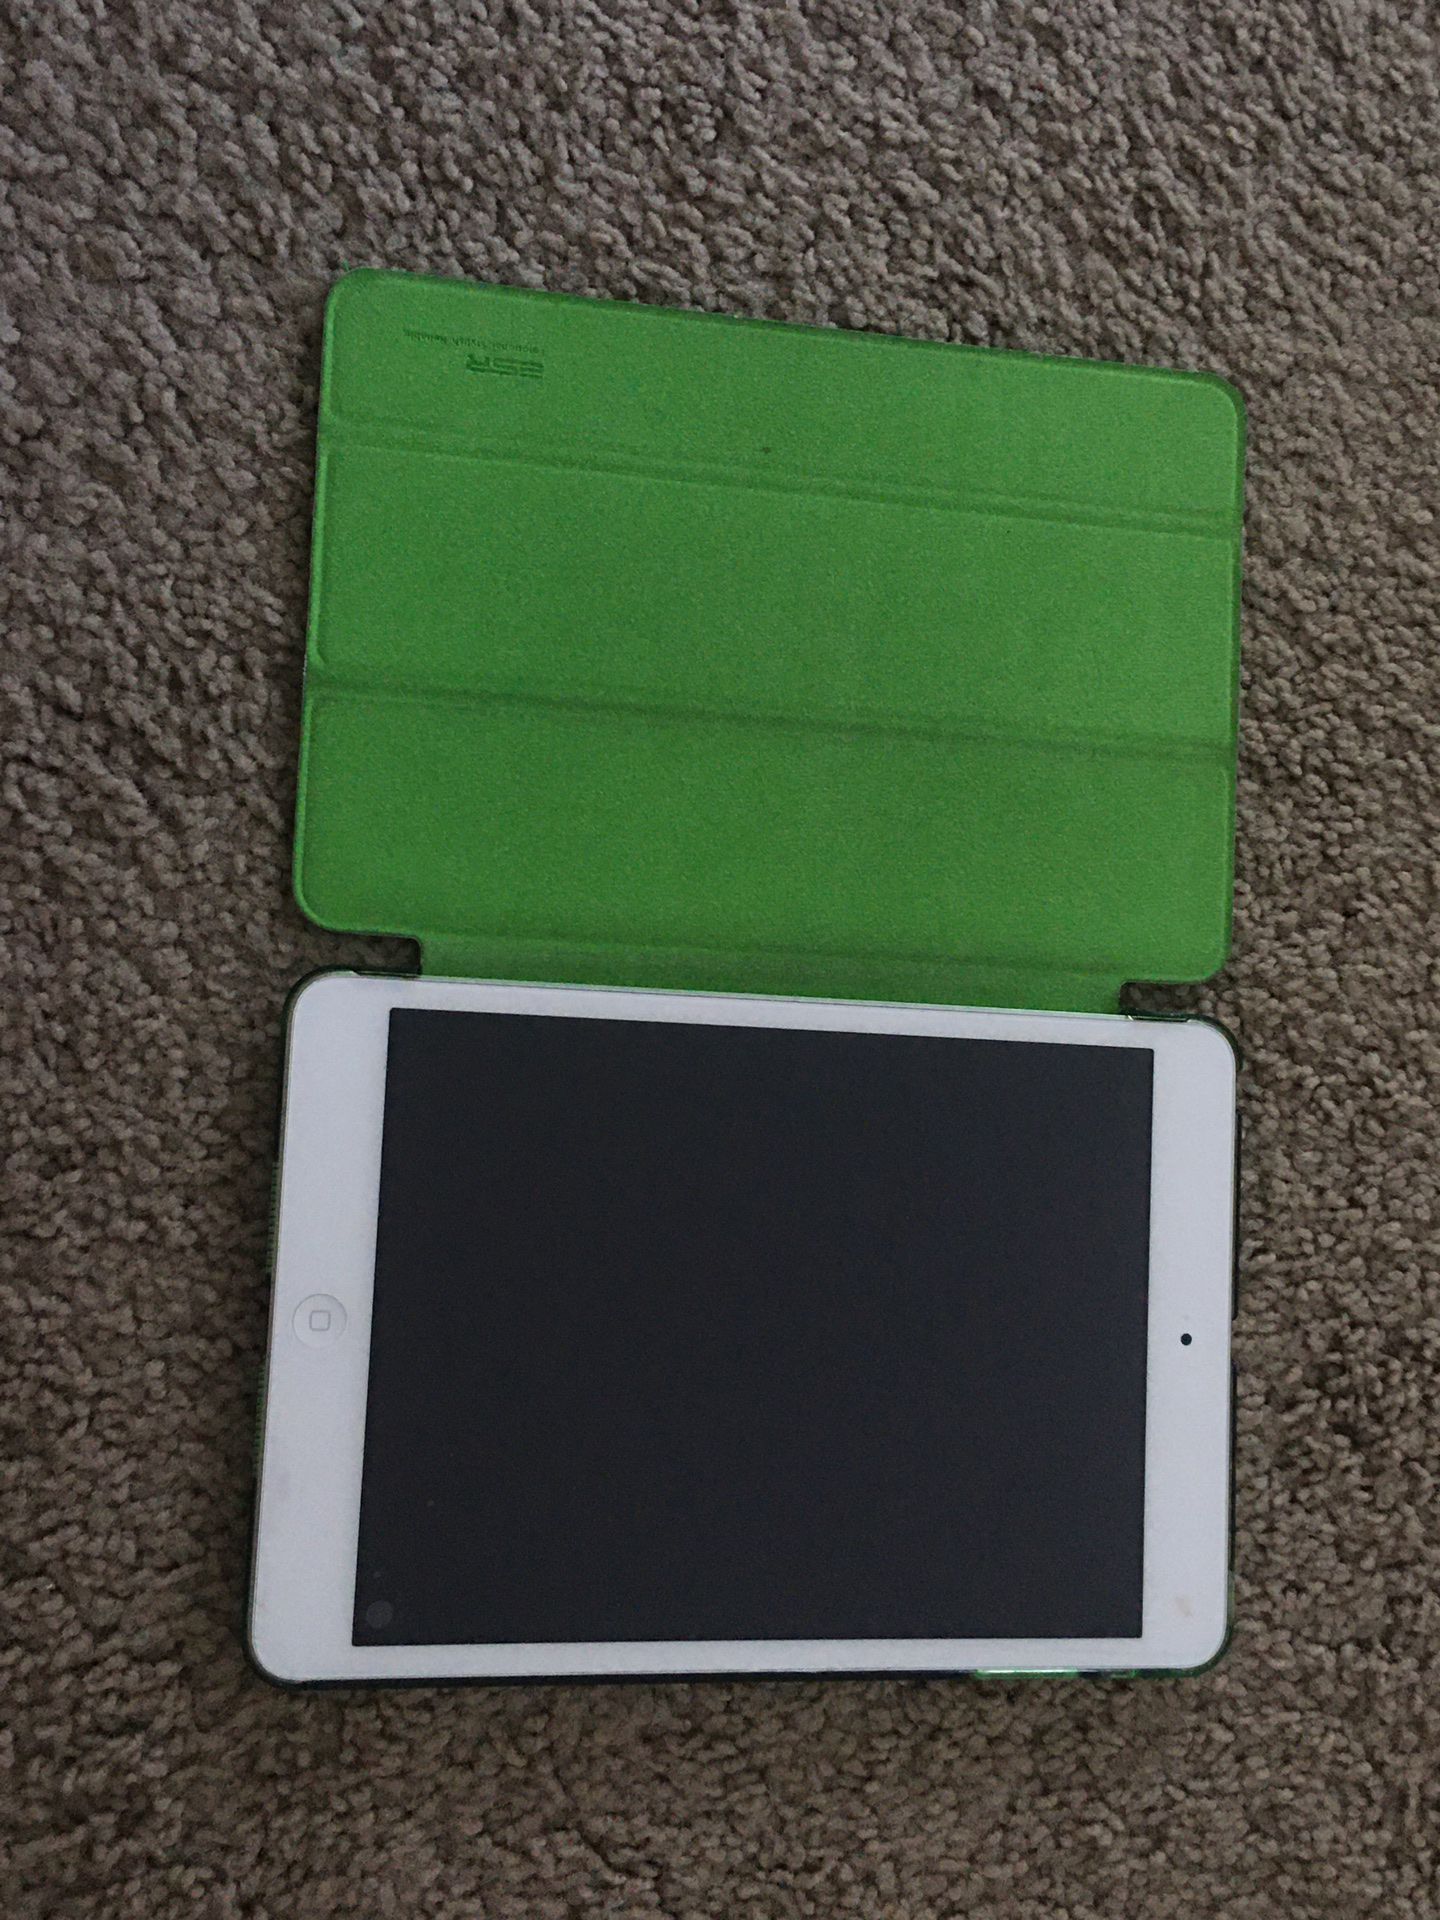 Apple iPad 1st Gen with cover